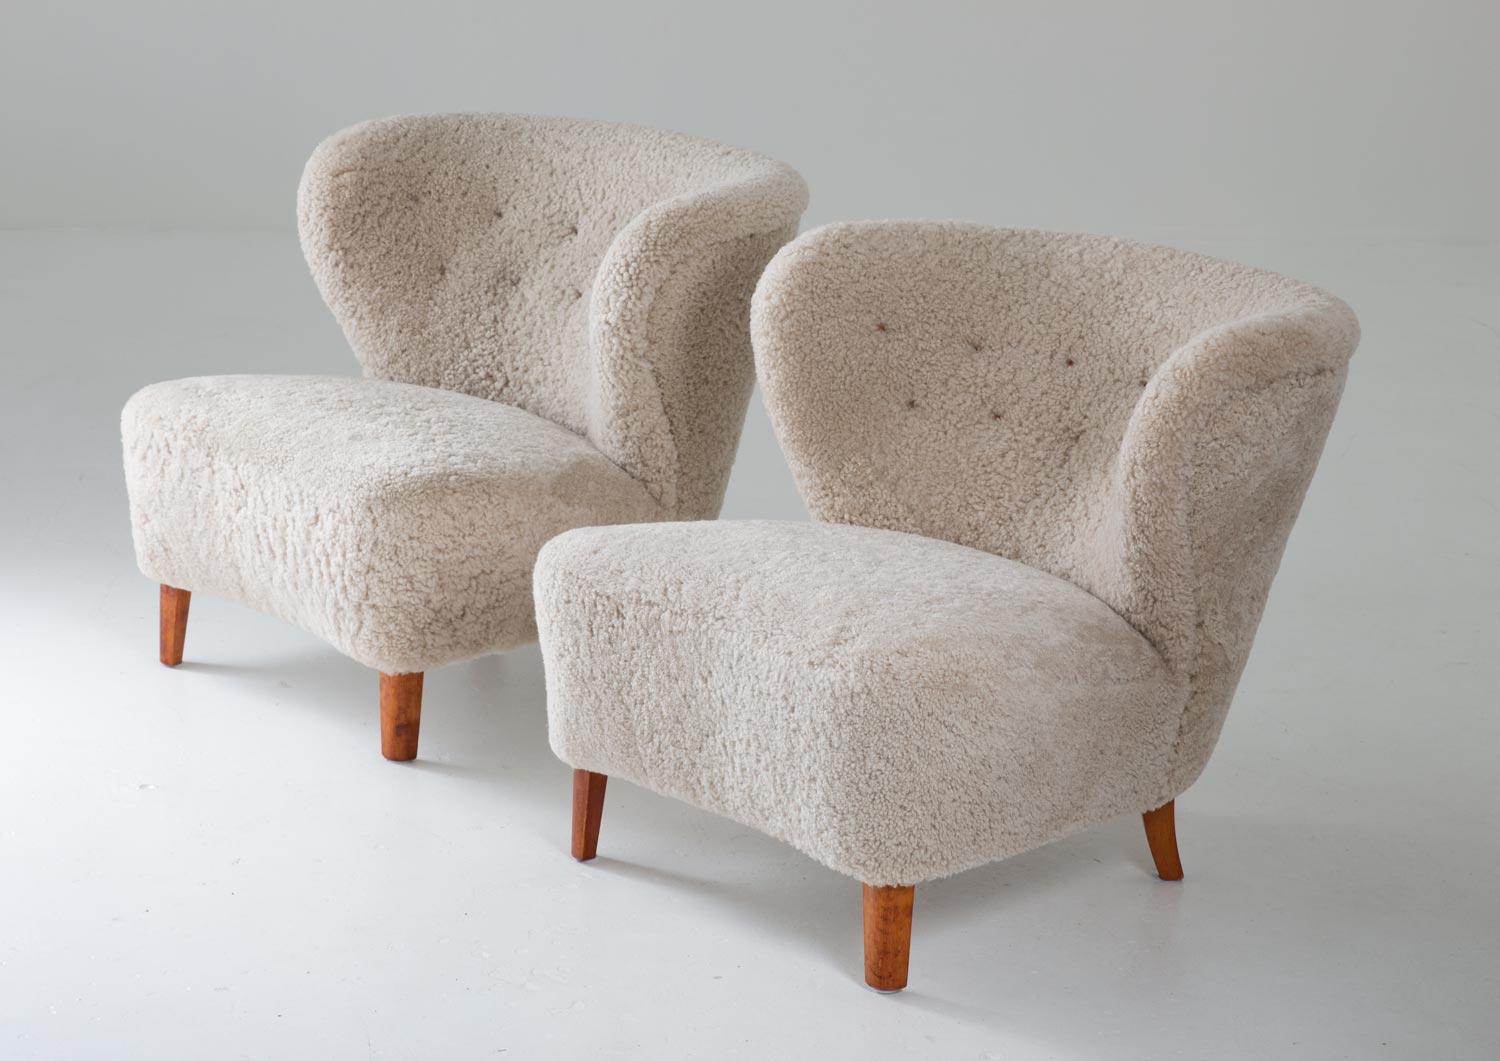 Scandinavian midcentury lounge chairs  and sofa by Gösta Jonsson, Sweden, 1940s.
Sculptural lounge chairs and sofa upholstered in off-white sheepskin.
The chair's organic forms and harmonious proportions are an excellent example of great Swedish